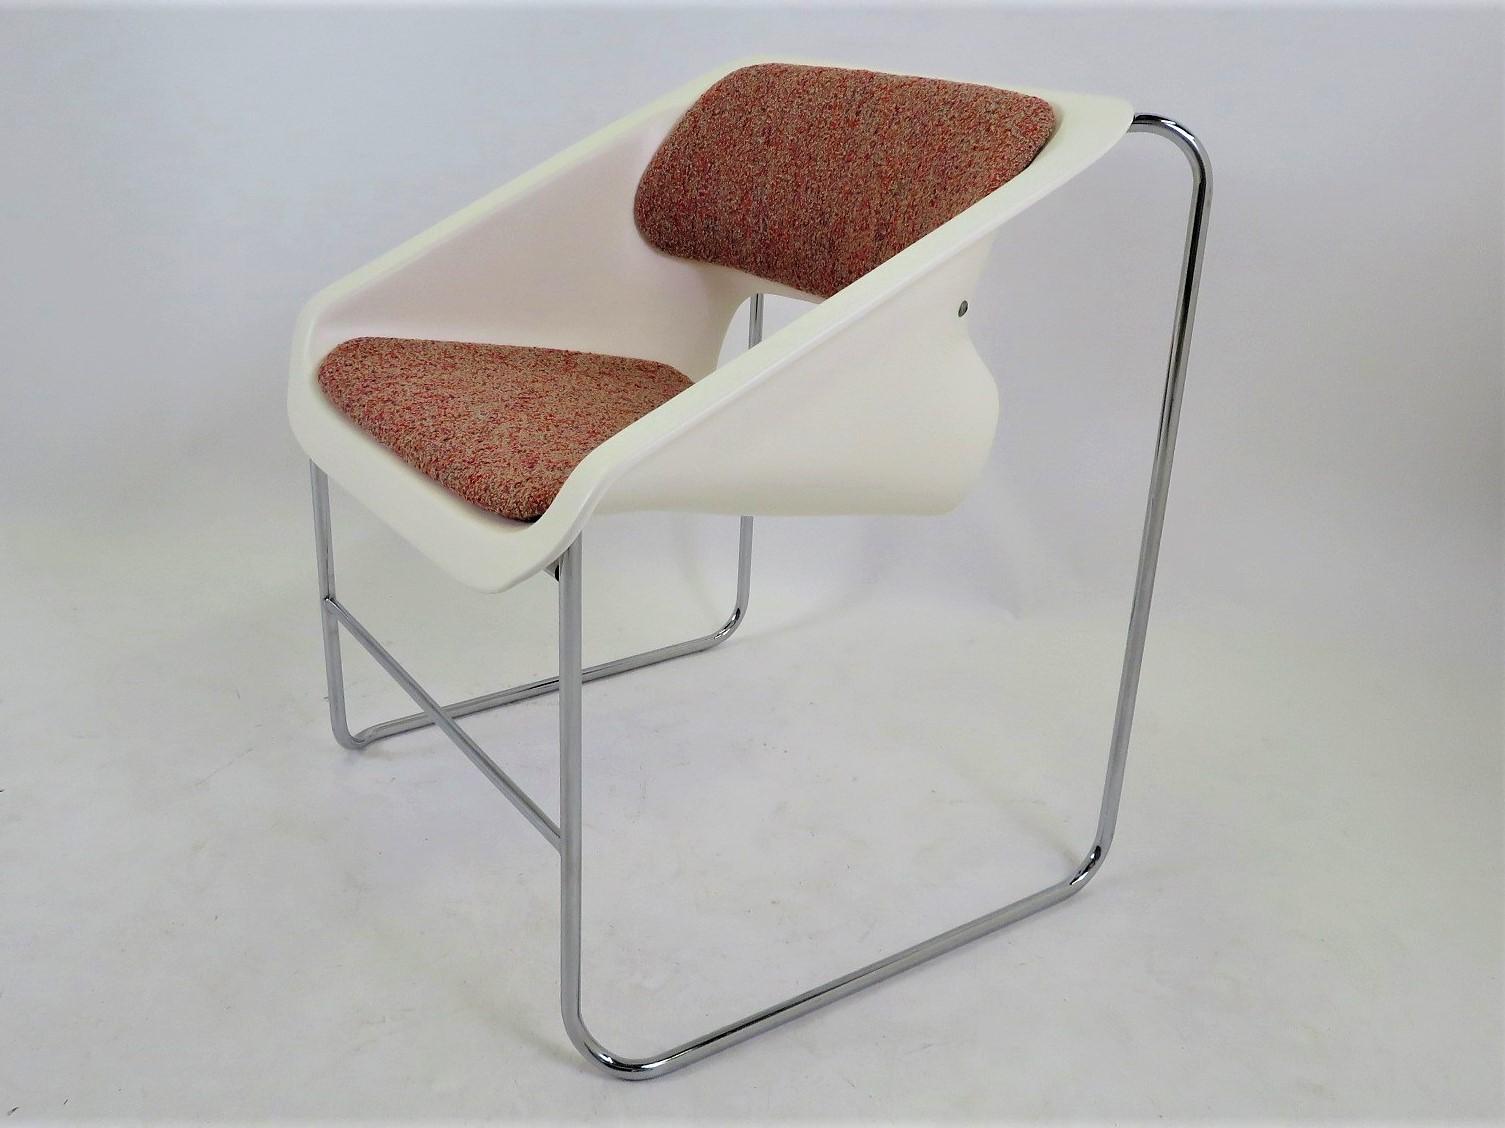 Space Age Modern armchair created by Paul Boulva for the Montreal Olympics in 1976 and produced by Artopex of Canada. The chair sport a chromed metal frame with molded plastic seat with back and seat upholstered. The chair is covered in a Boucle